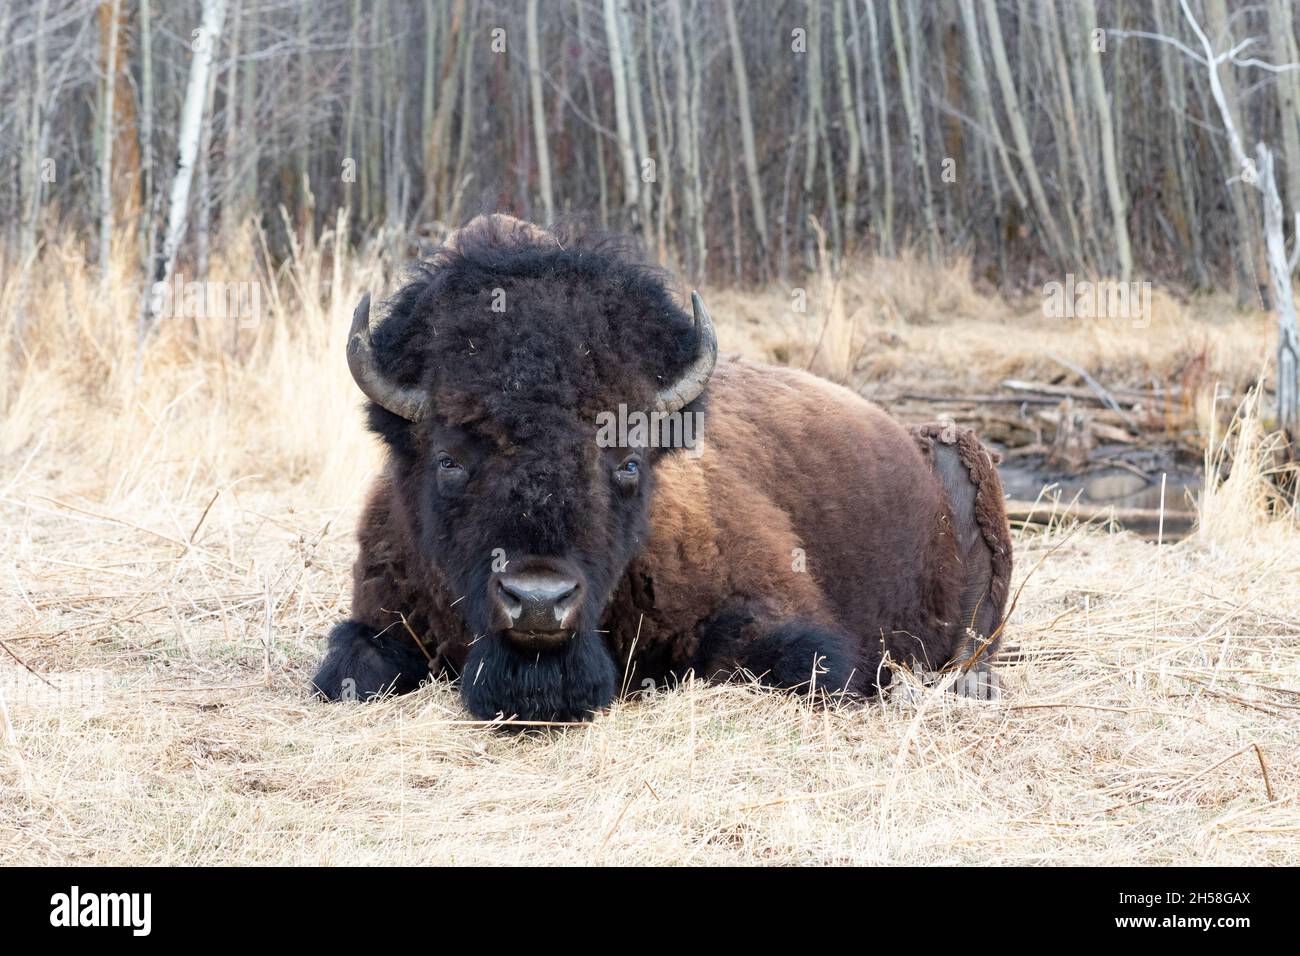 Full body shot of bison laying down in straw in front of lake and pirch trees. Looking straight at camera Stock Photo